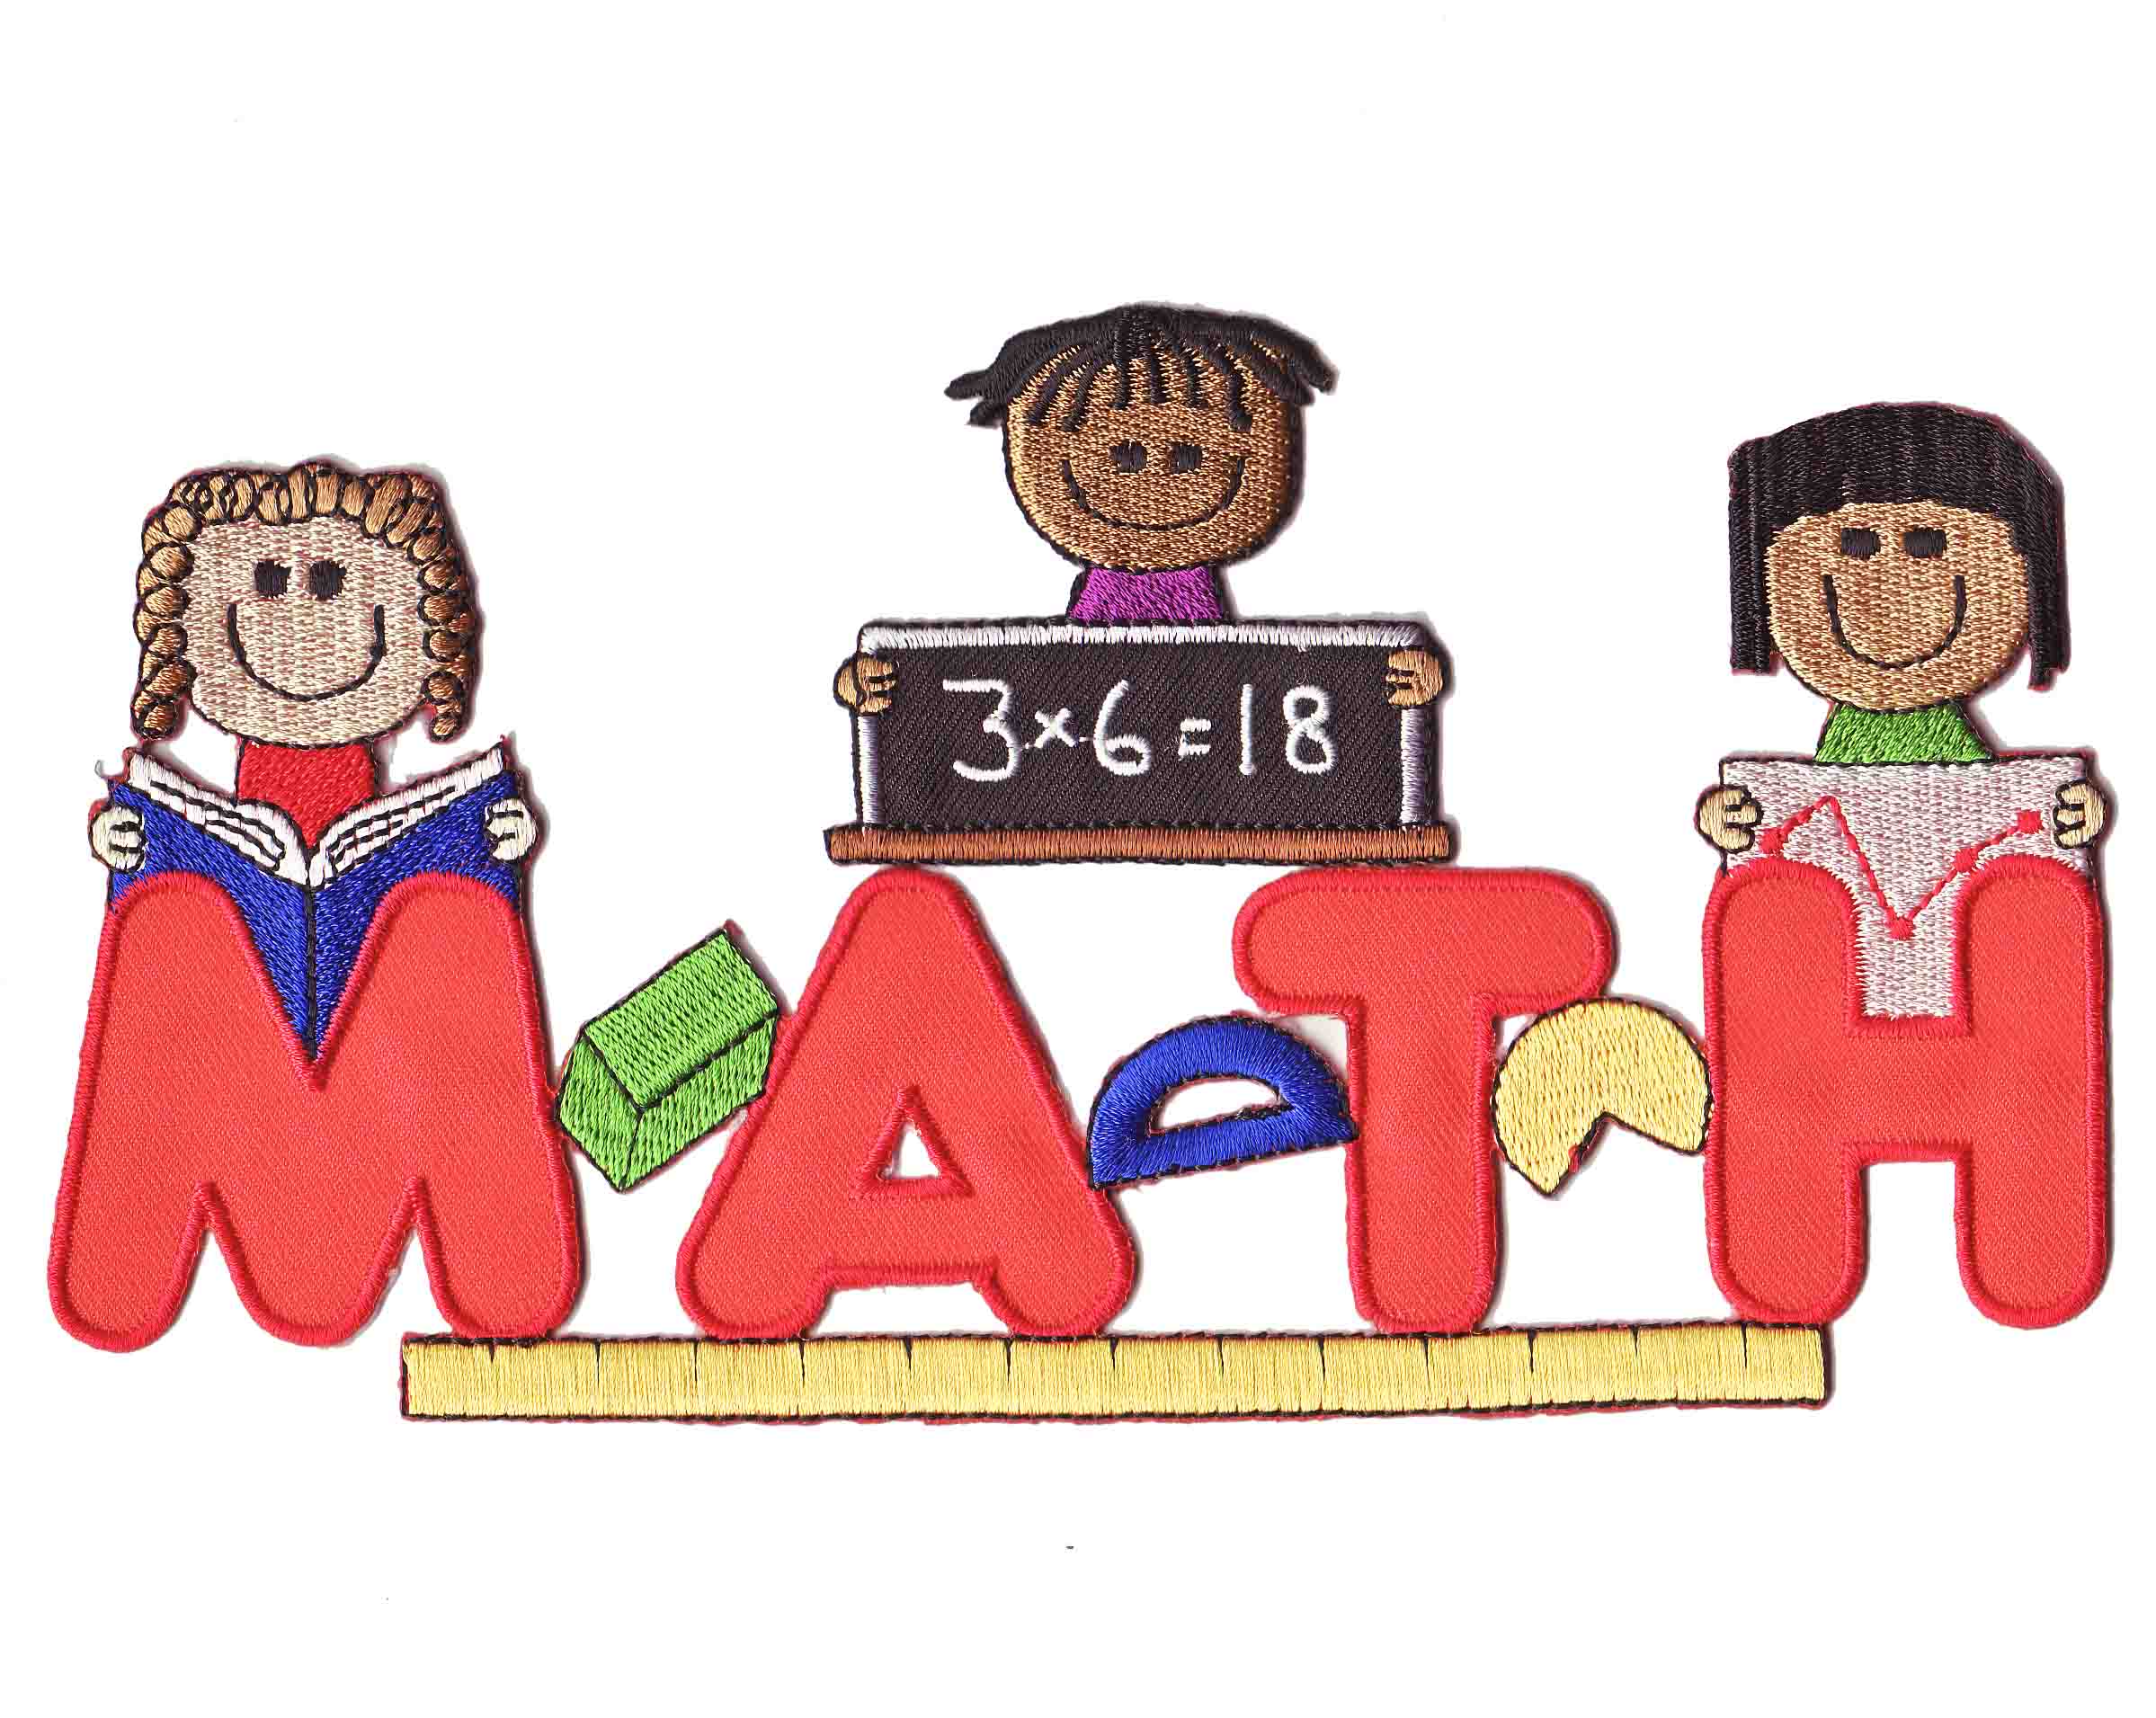 Free Math Images For Kids, Download Free Clip Art, Free Clip.